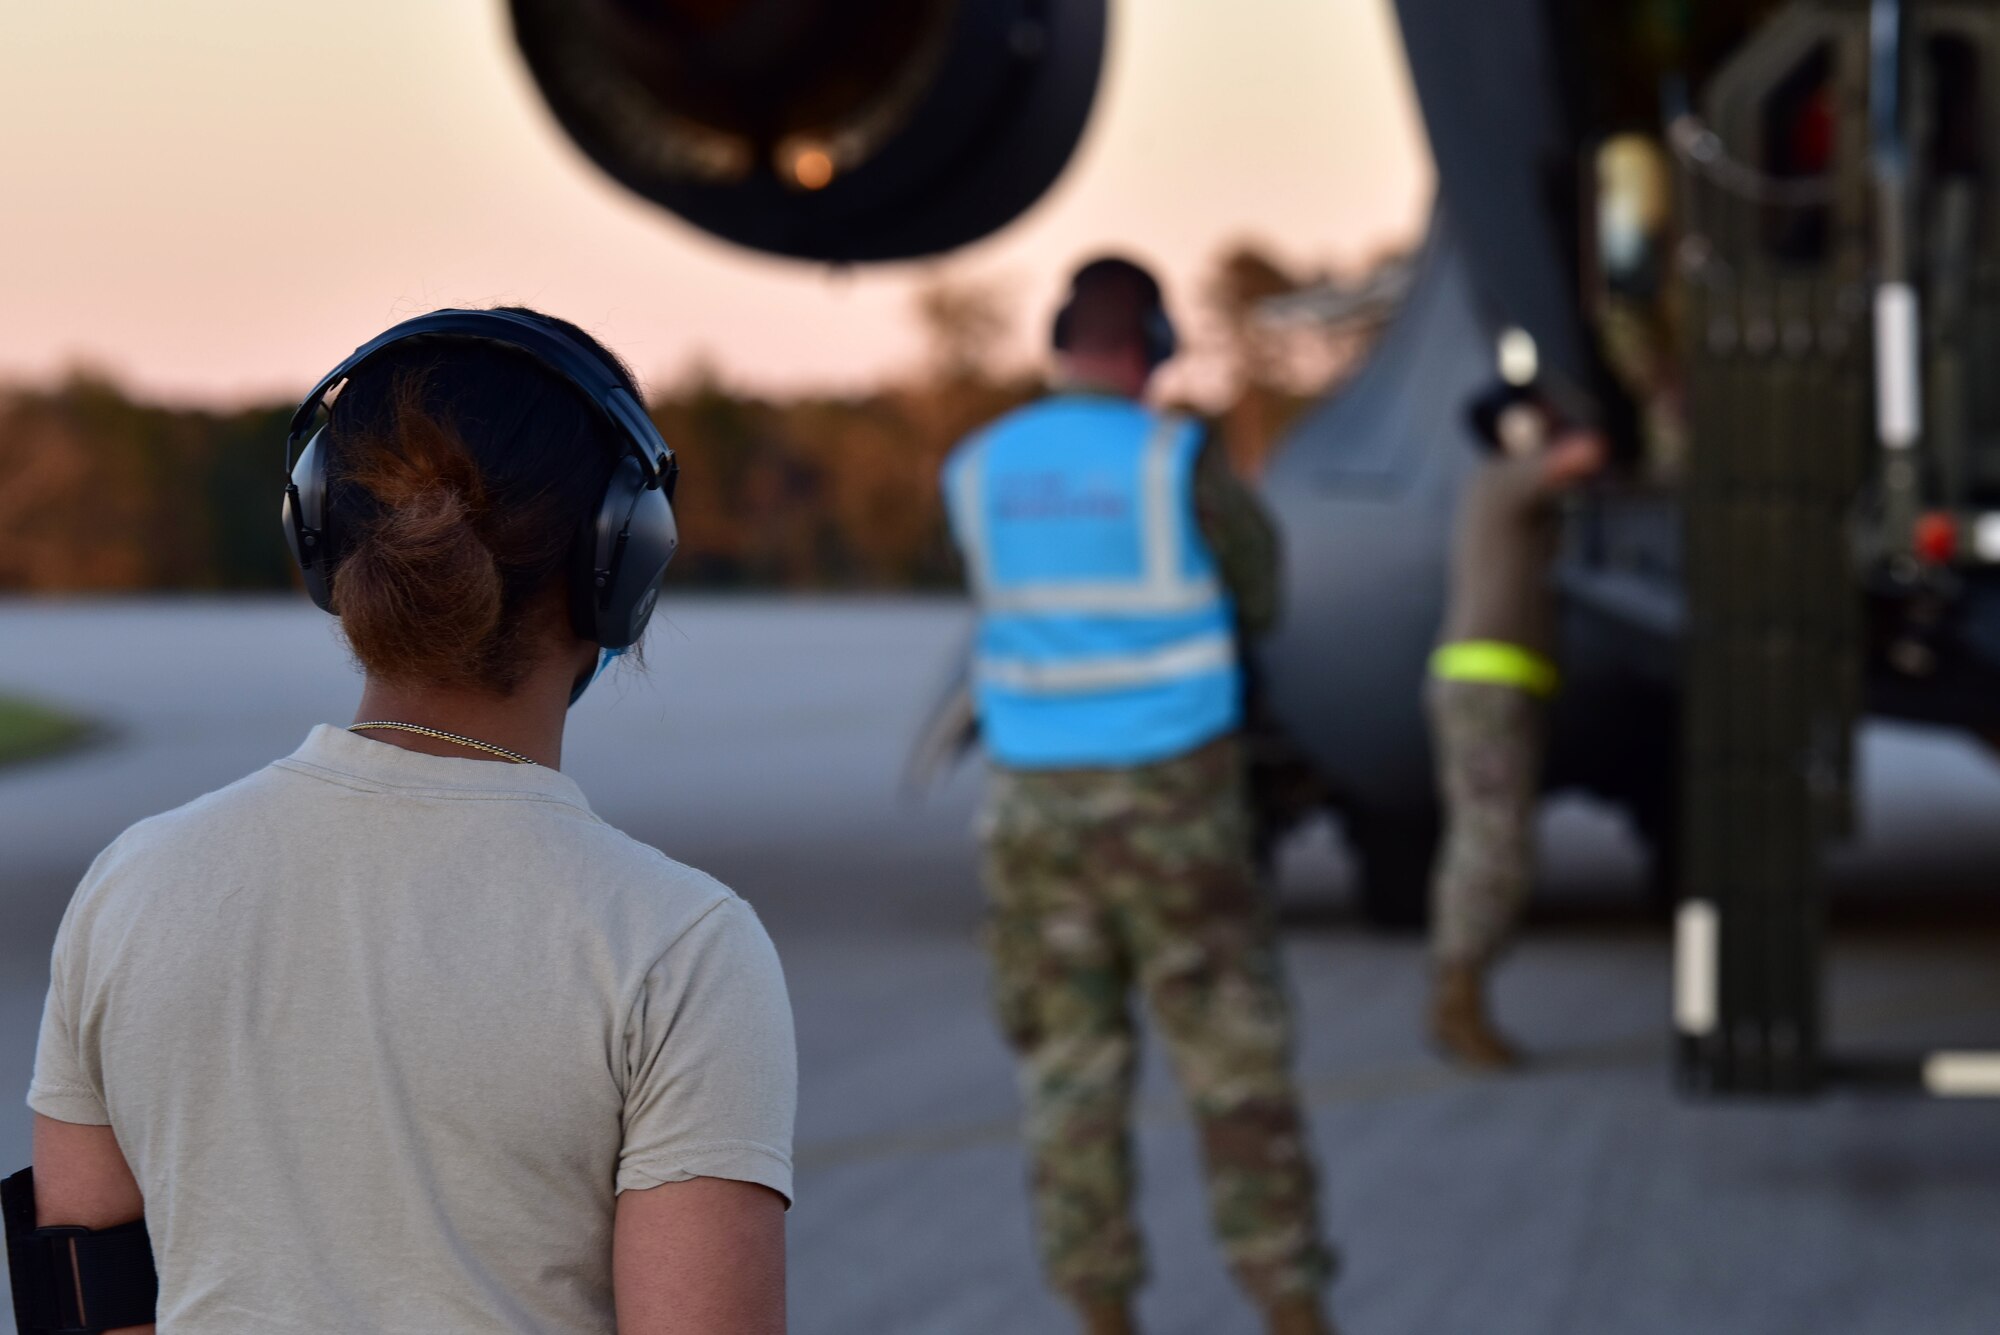 Airmen assigned to the 628th Air Base Wing begin to offload cargo from a C-17 Globemaster III at McEntire Joint National Guard Base, S.C., Nov. 16, 2020. Palmetto Challenge is a global mobilization exercise held at McEntire Joint National Guard Base, S.C., and Pope Army Airfield, N.C. The exercise is held in order to develop readiness and awareness in a simulated deployed environment for over 100 Airmen from Joint Base Charleston.